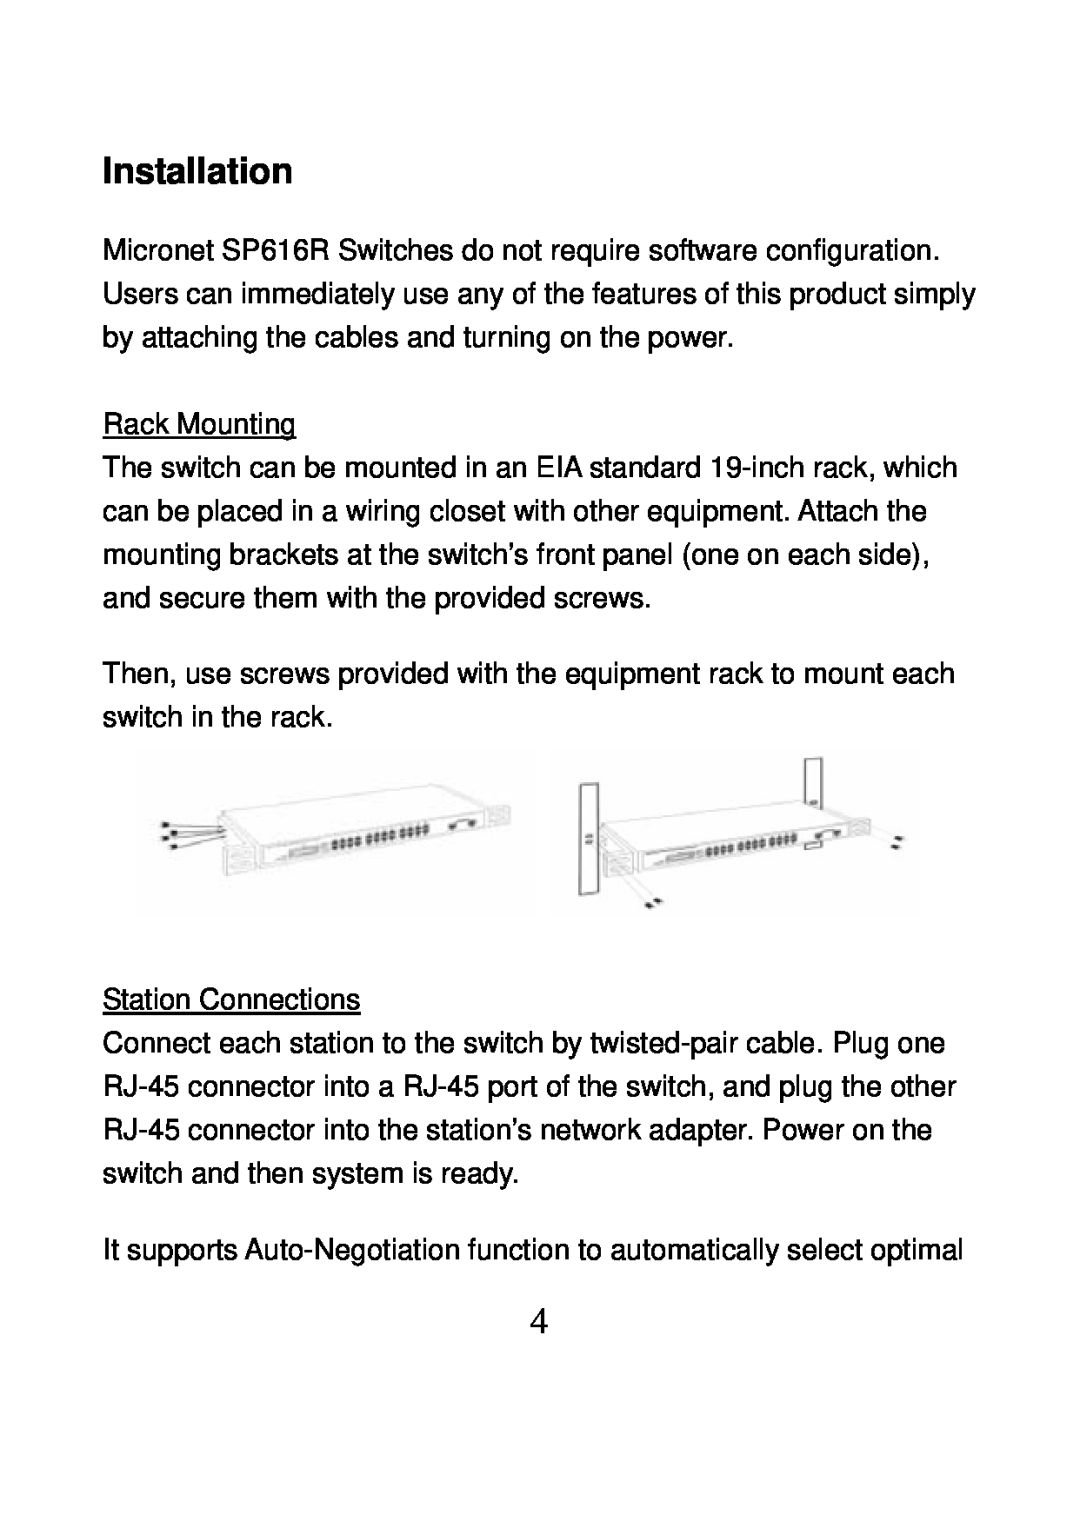 MicroNet Technology SP616R manual Installation 